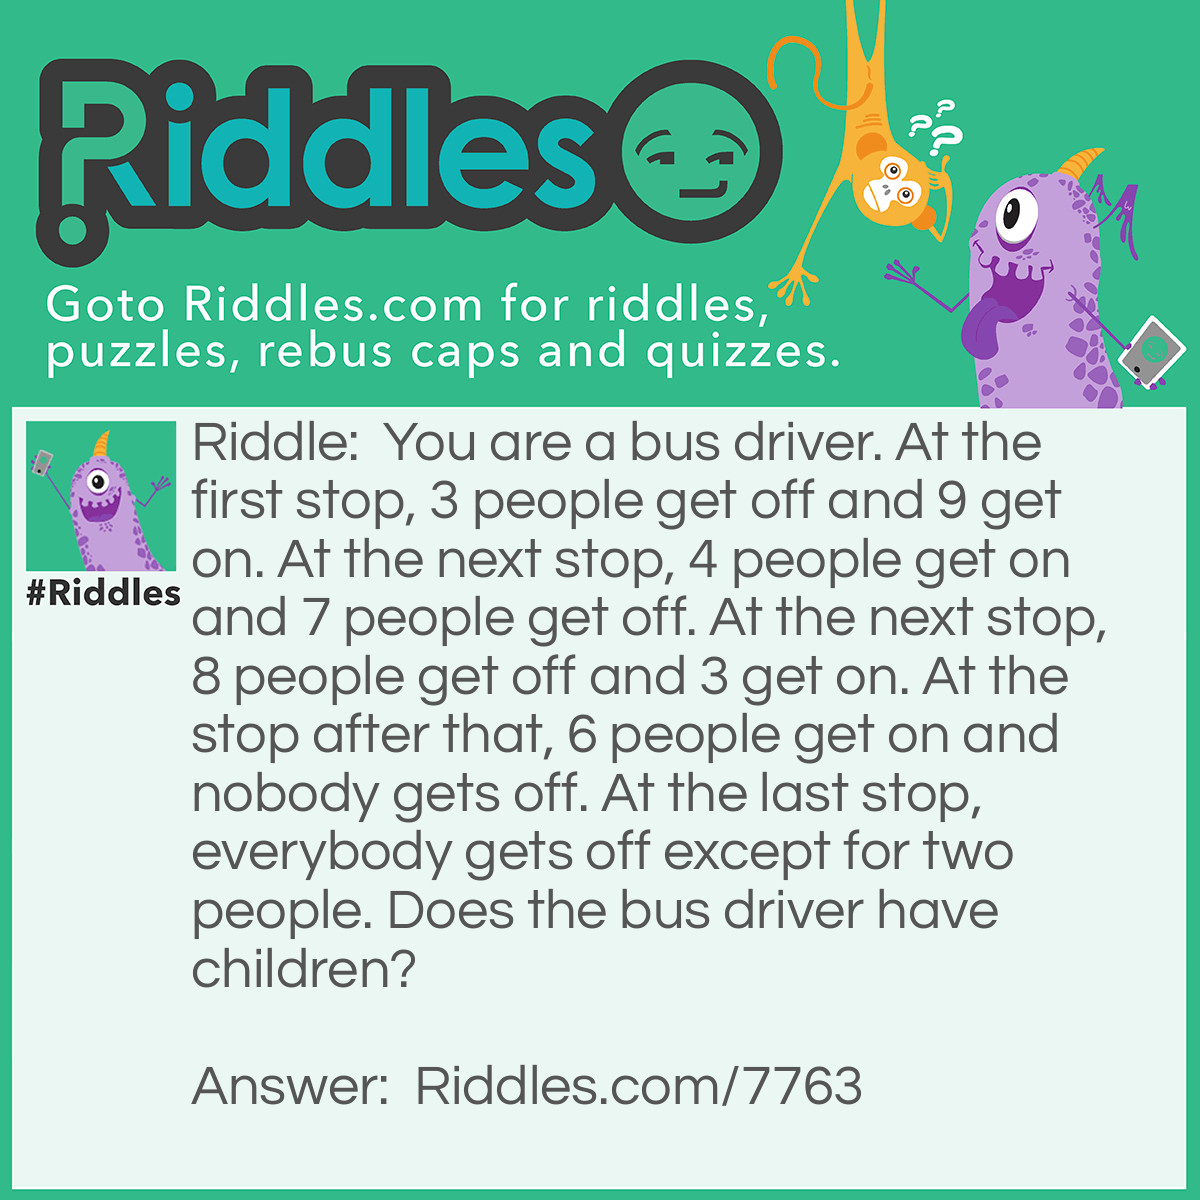 Riddle: You are a bus driver. At the first stop, 3 people get off and 9 get on. At the next stop, 4 people get on and 7 people get off. At the next stop, 8 people get off and 3 get on. At the stop after that, 6 people get on and nobody gets off. At the last stop, everybody gets off except for two people. Does the bus driver have children? Answer: Yes or no! You are the bus driver, so, if you have children then the answer is yes!